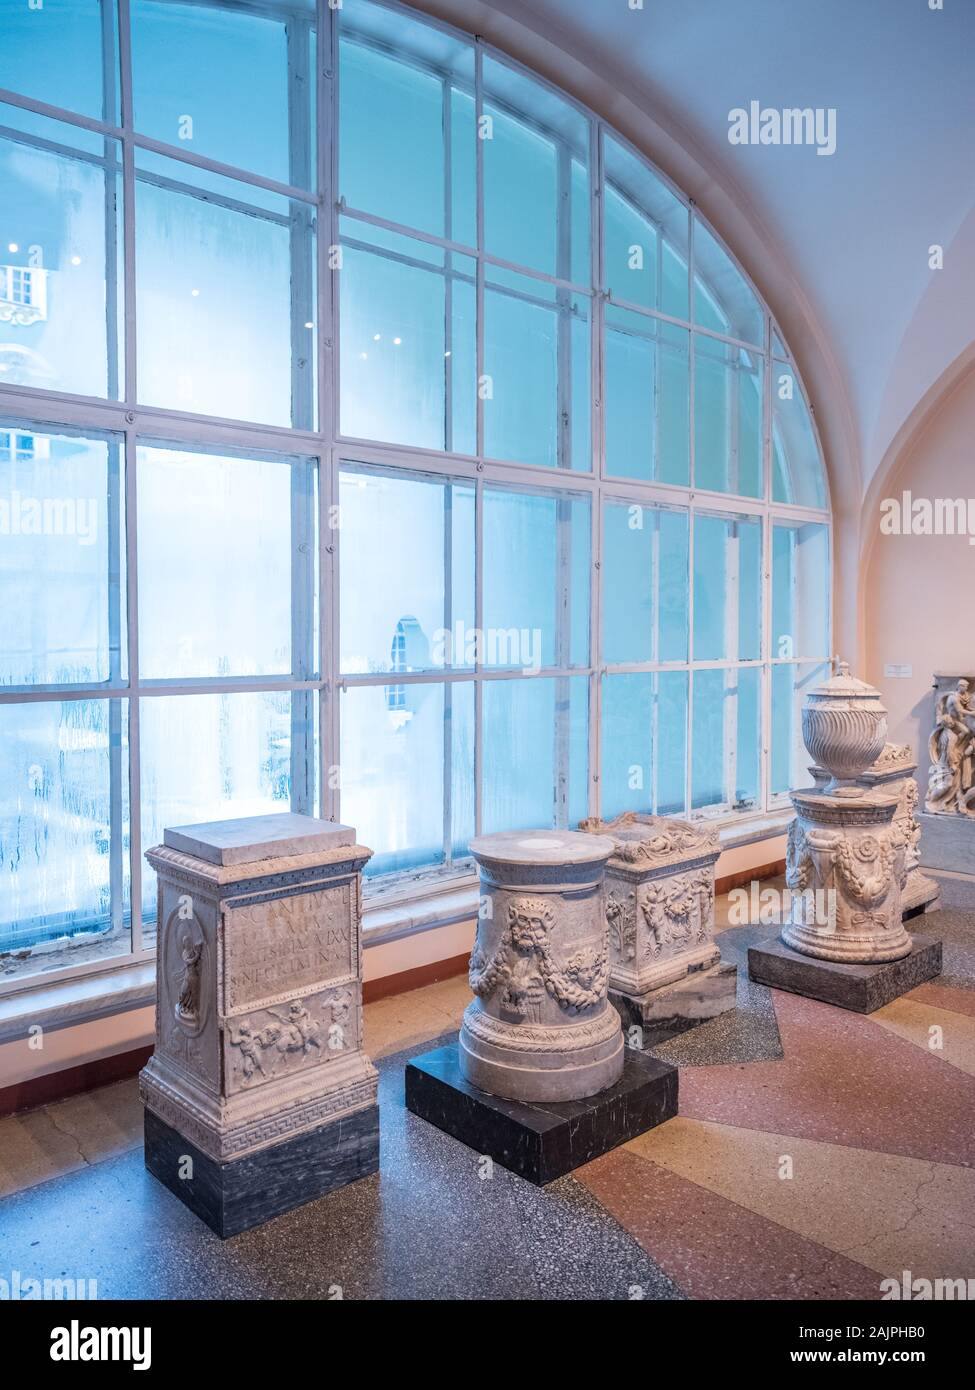 interior and exhibits of the Hermitage in Saint Petersburg; the exhibits of the winter Palace Stock Photo